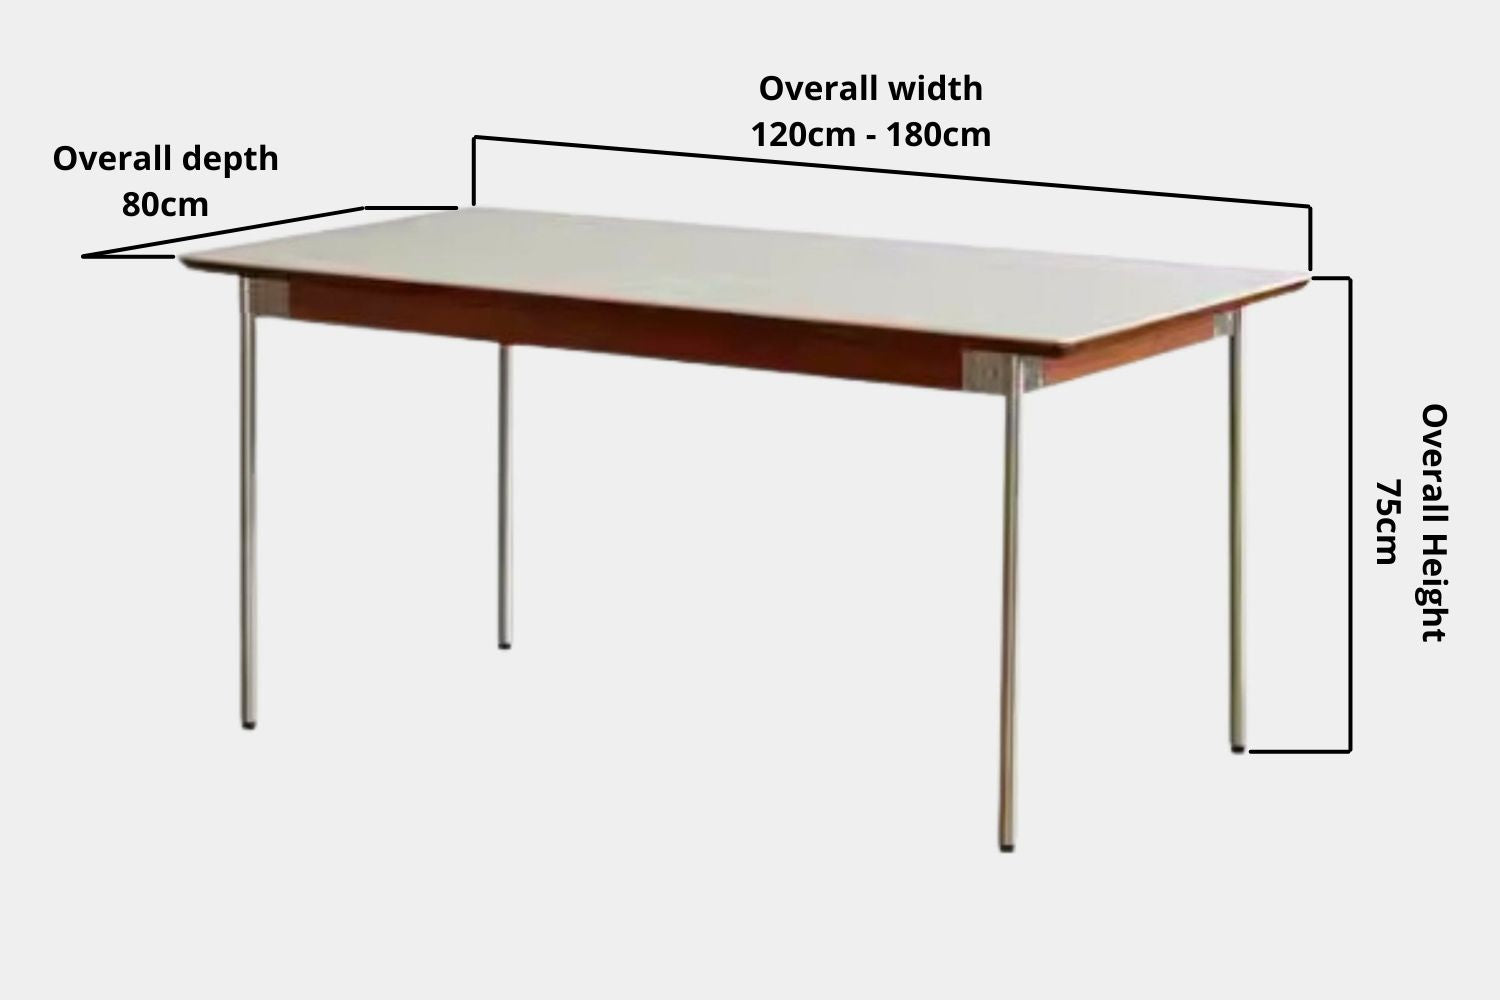 Key product dimensions such as depth, width and height for Taylor Sintered Stone Dining Table